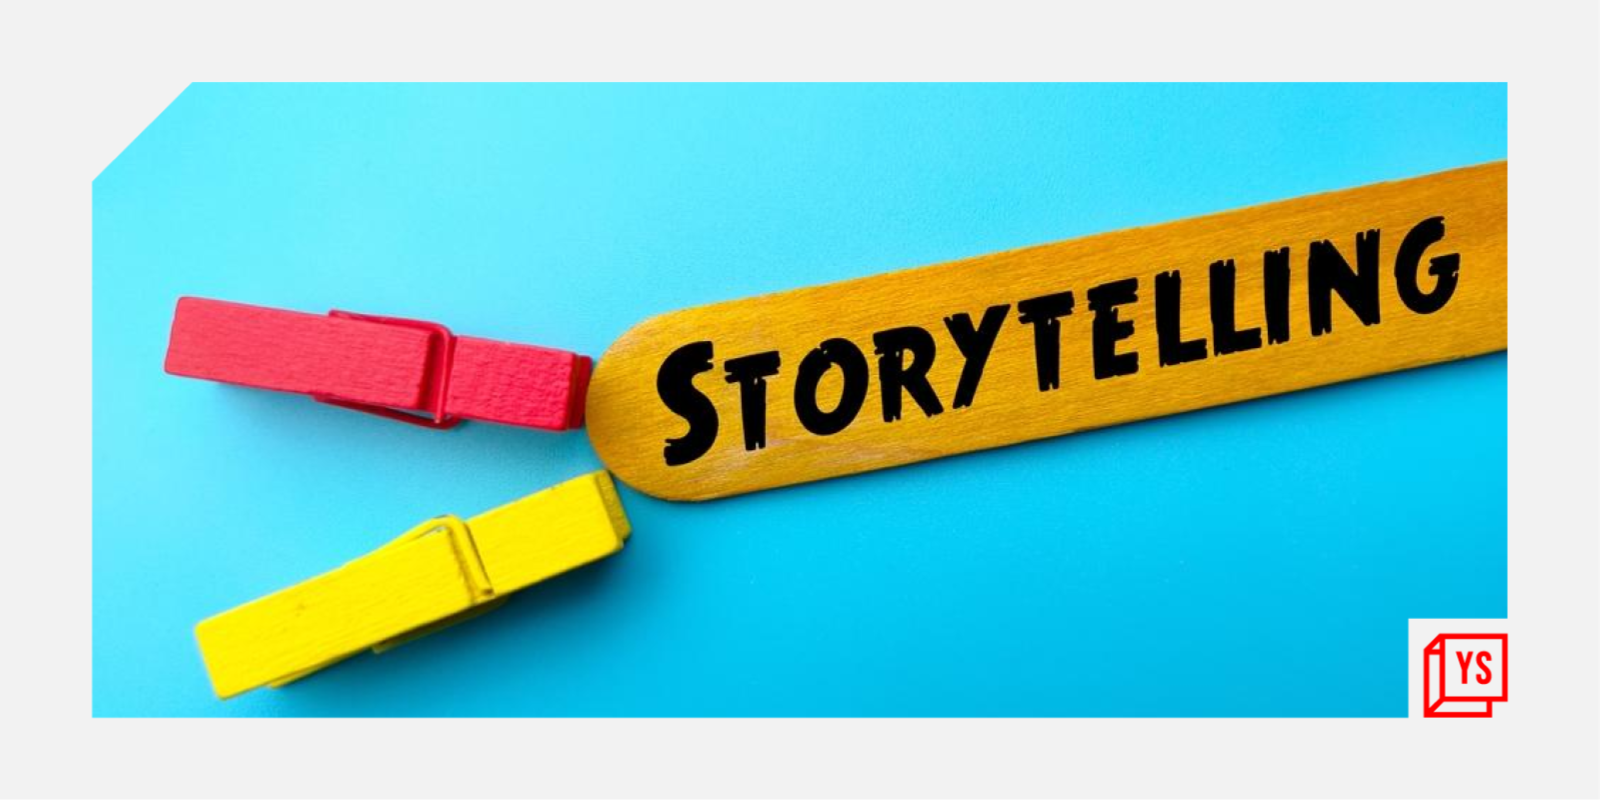 How can startups use storytelling to engage customers and build a brand?